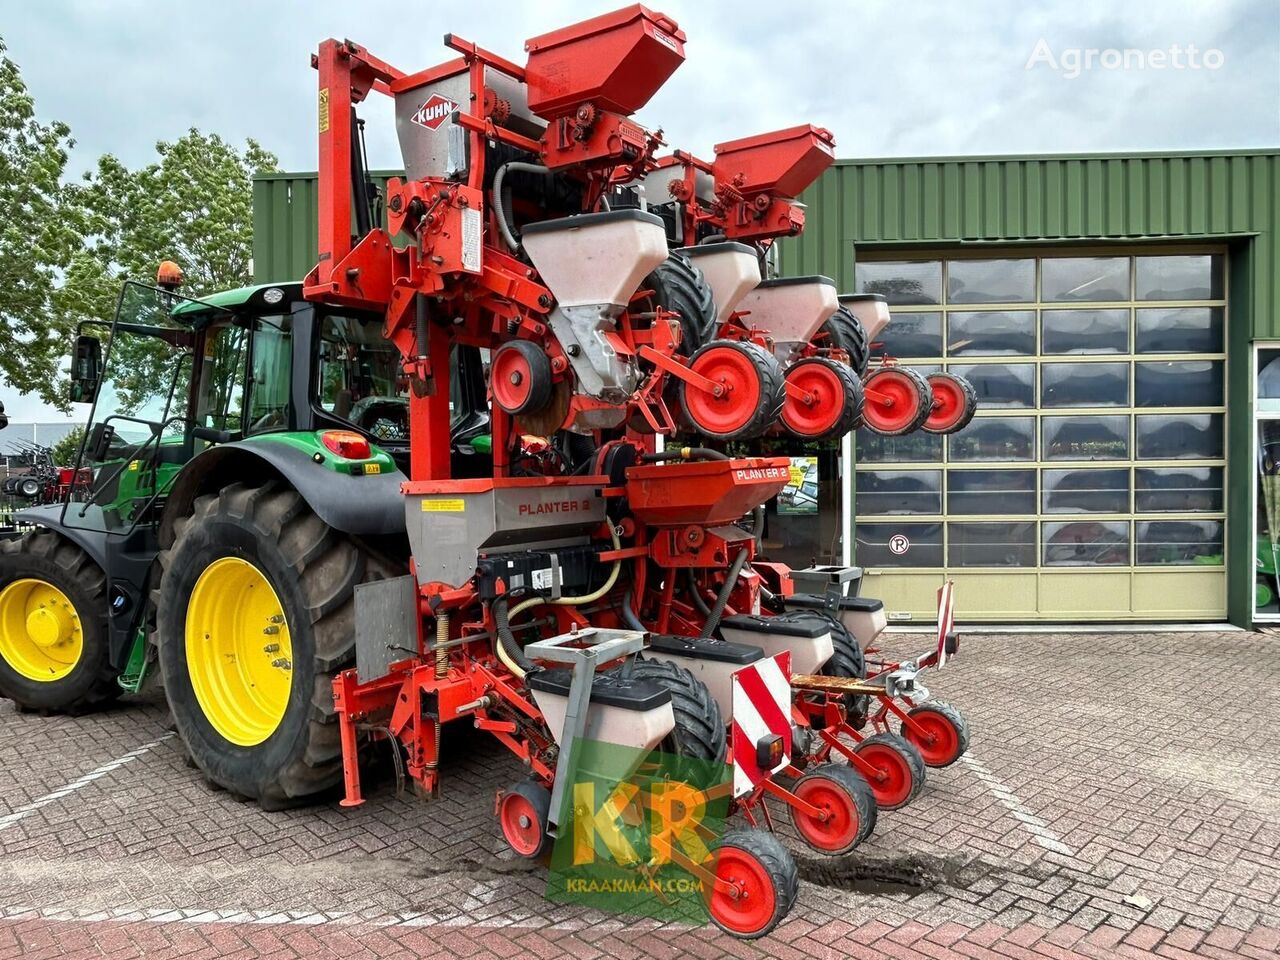 Kuhn PLANTER 2 pneumatic precision seed drill